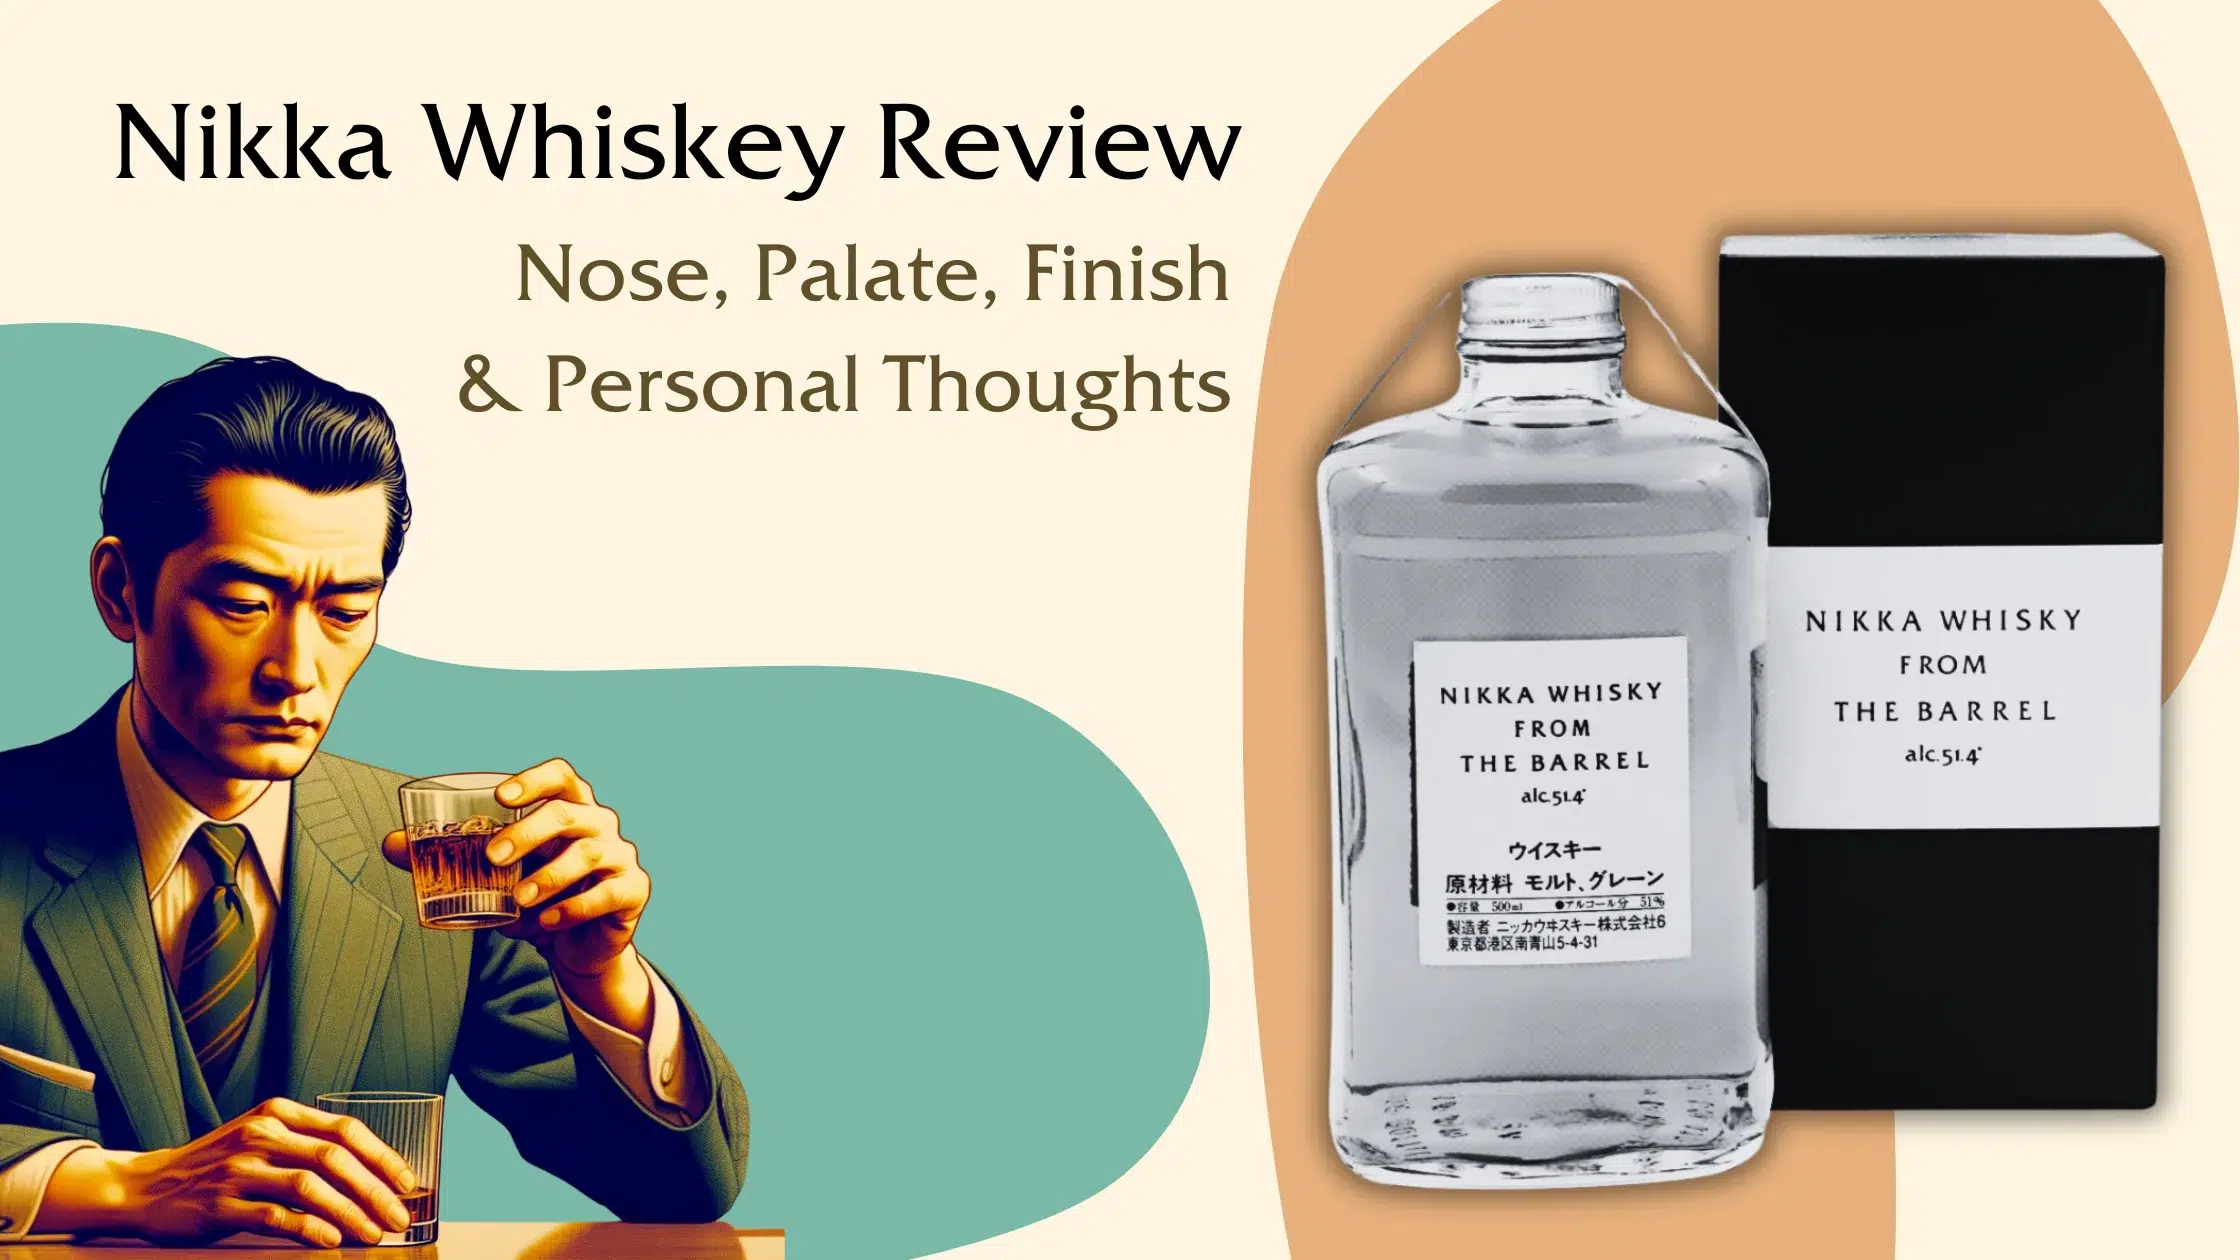 Nikka Whisky review infographic with tasting notes.